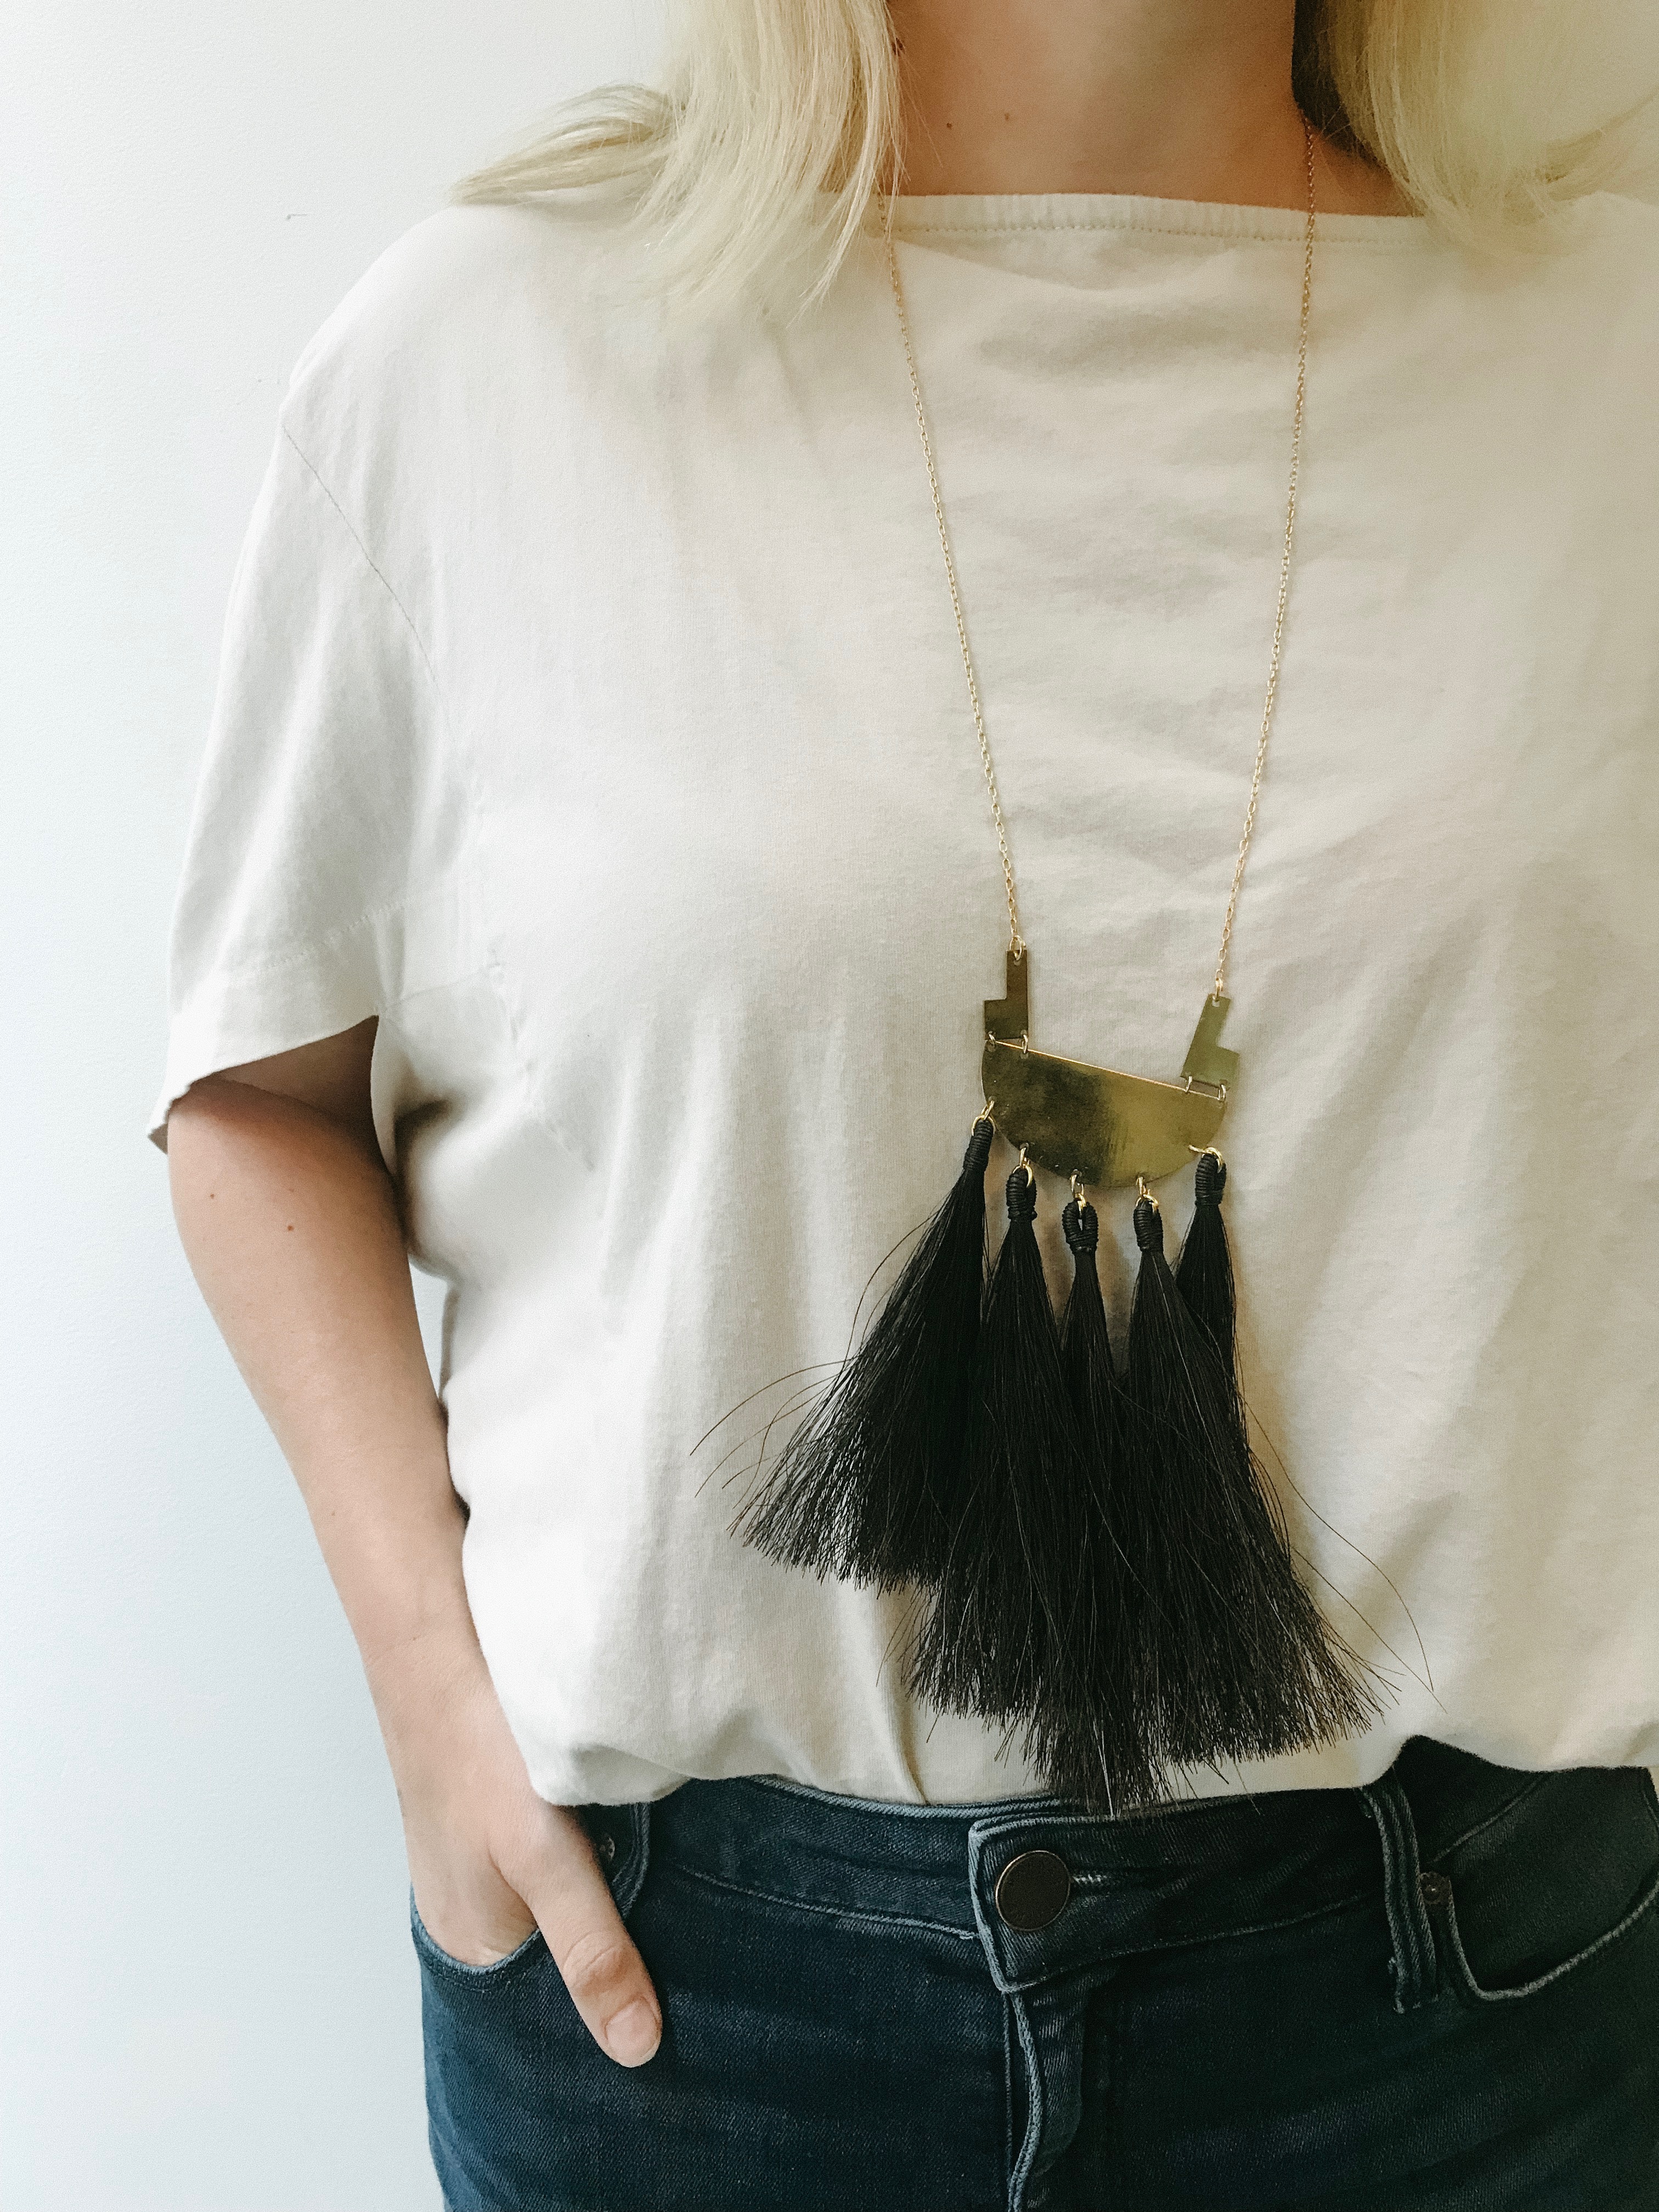 A woman models a large brass necklace. It hangs down to her mid torso and has black fringe. 